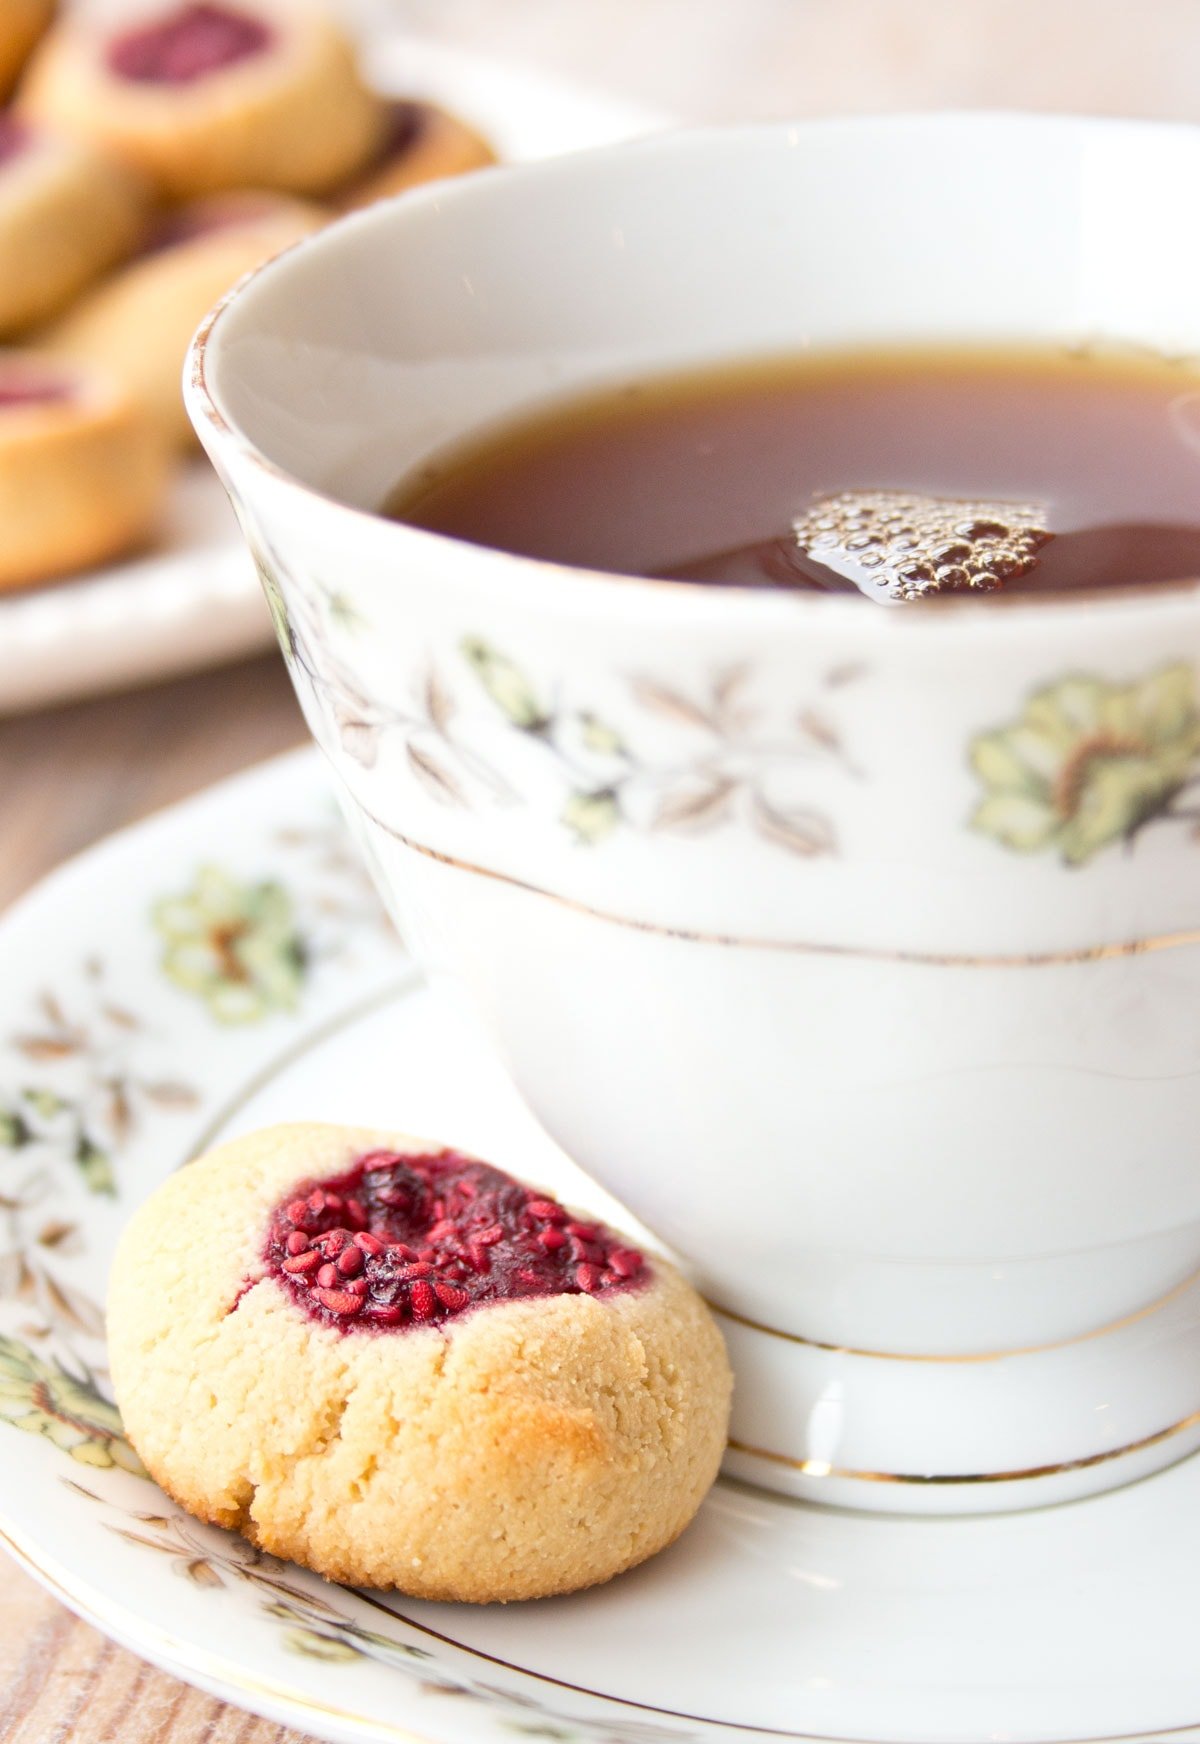 A cookie on a saucer with a cup of tea.